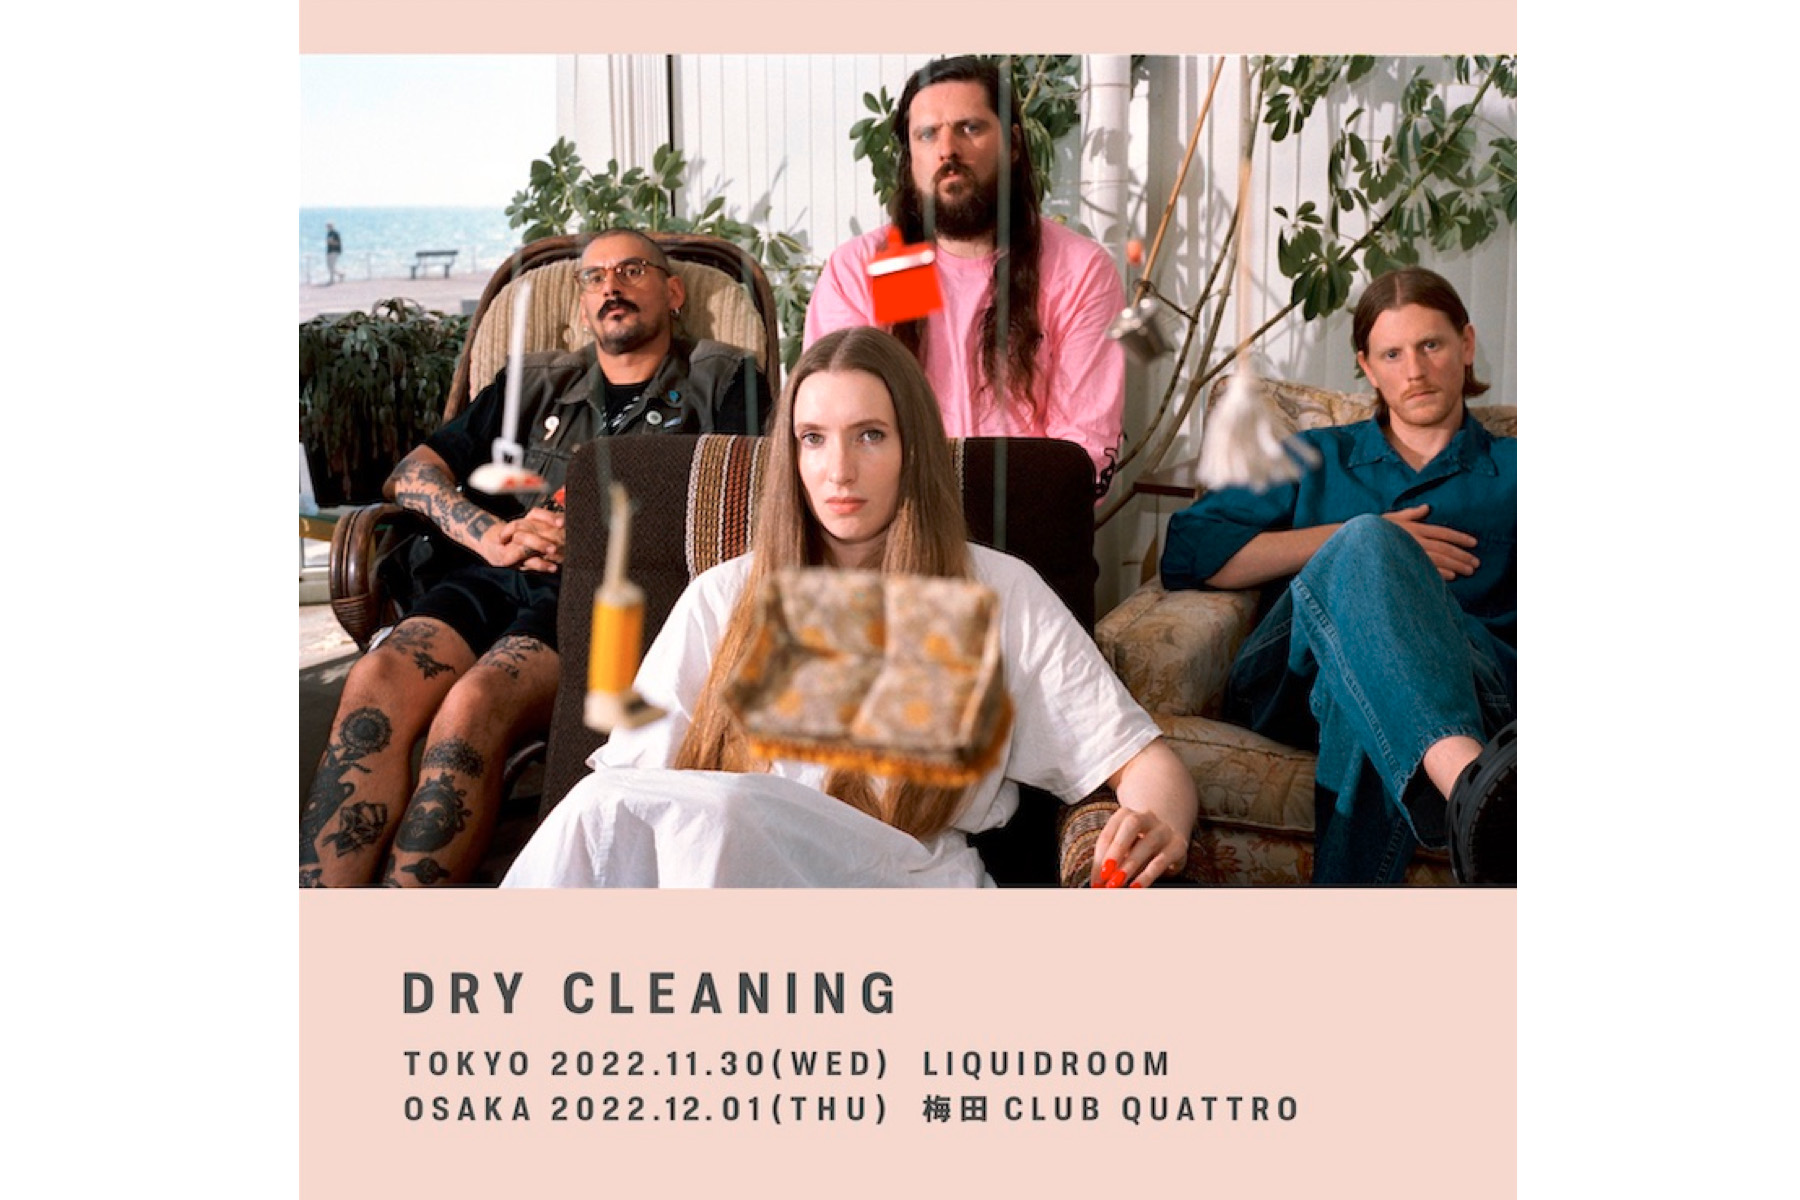 11.30 Wed. DRY CLEANING